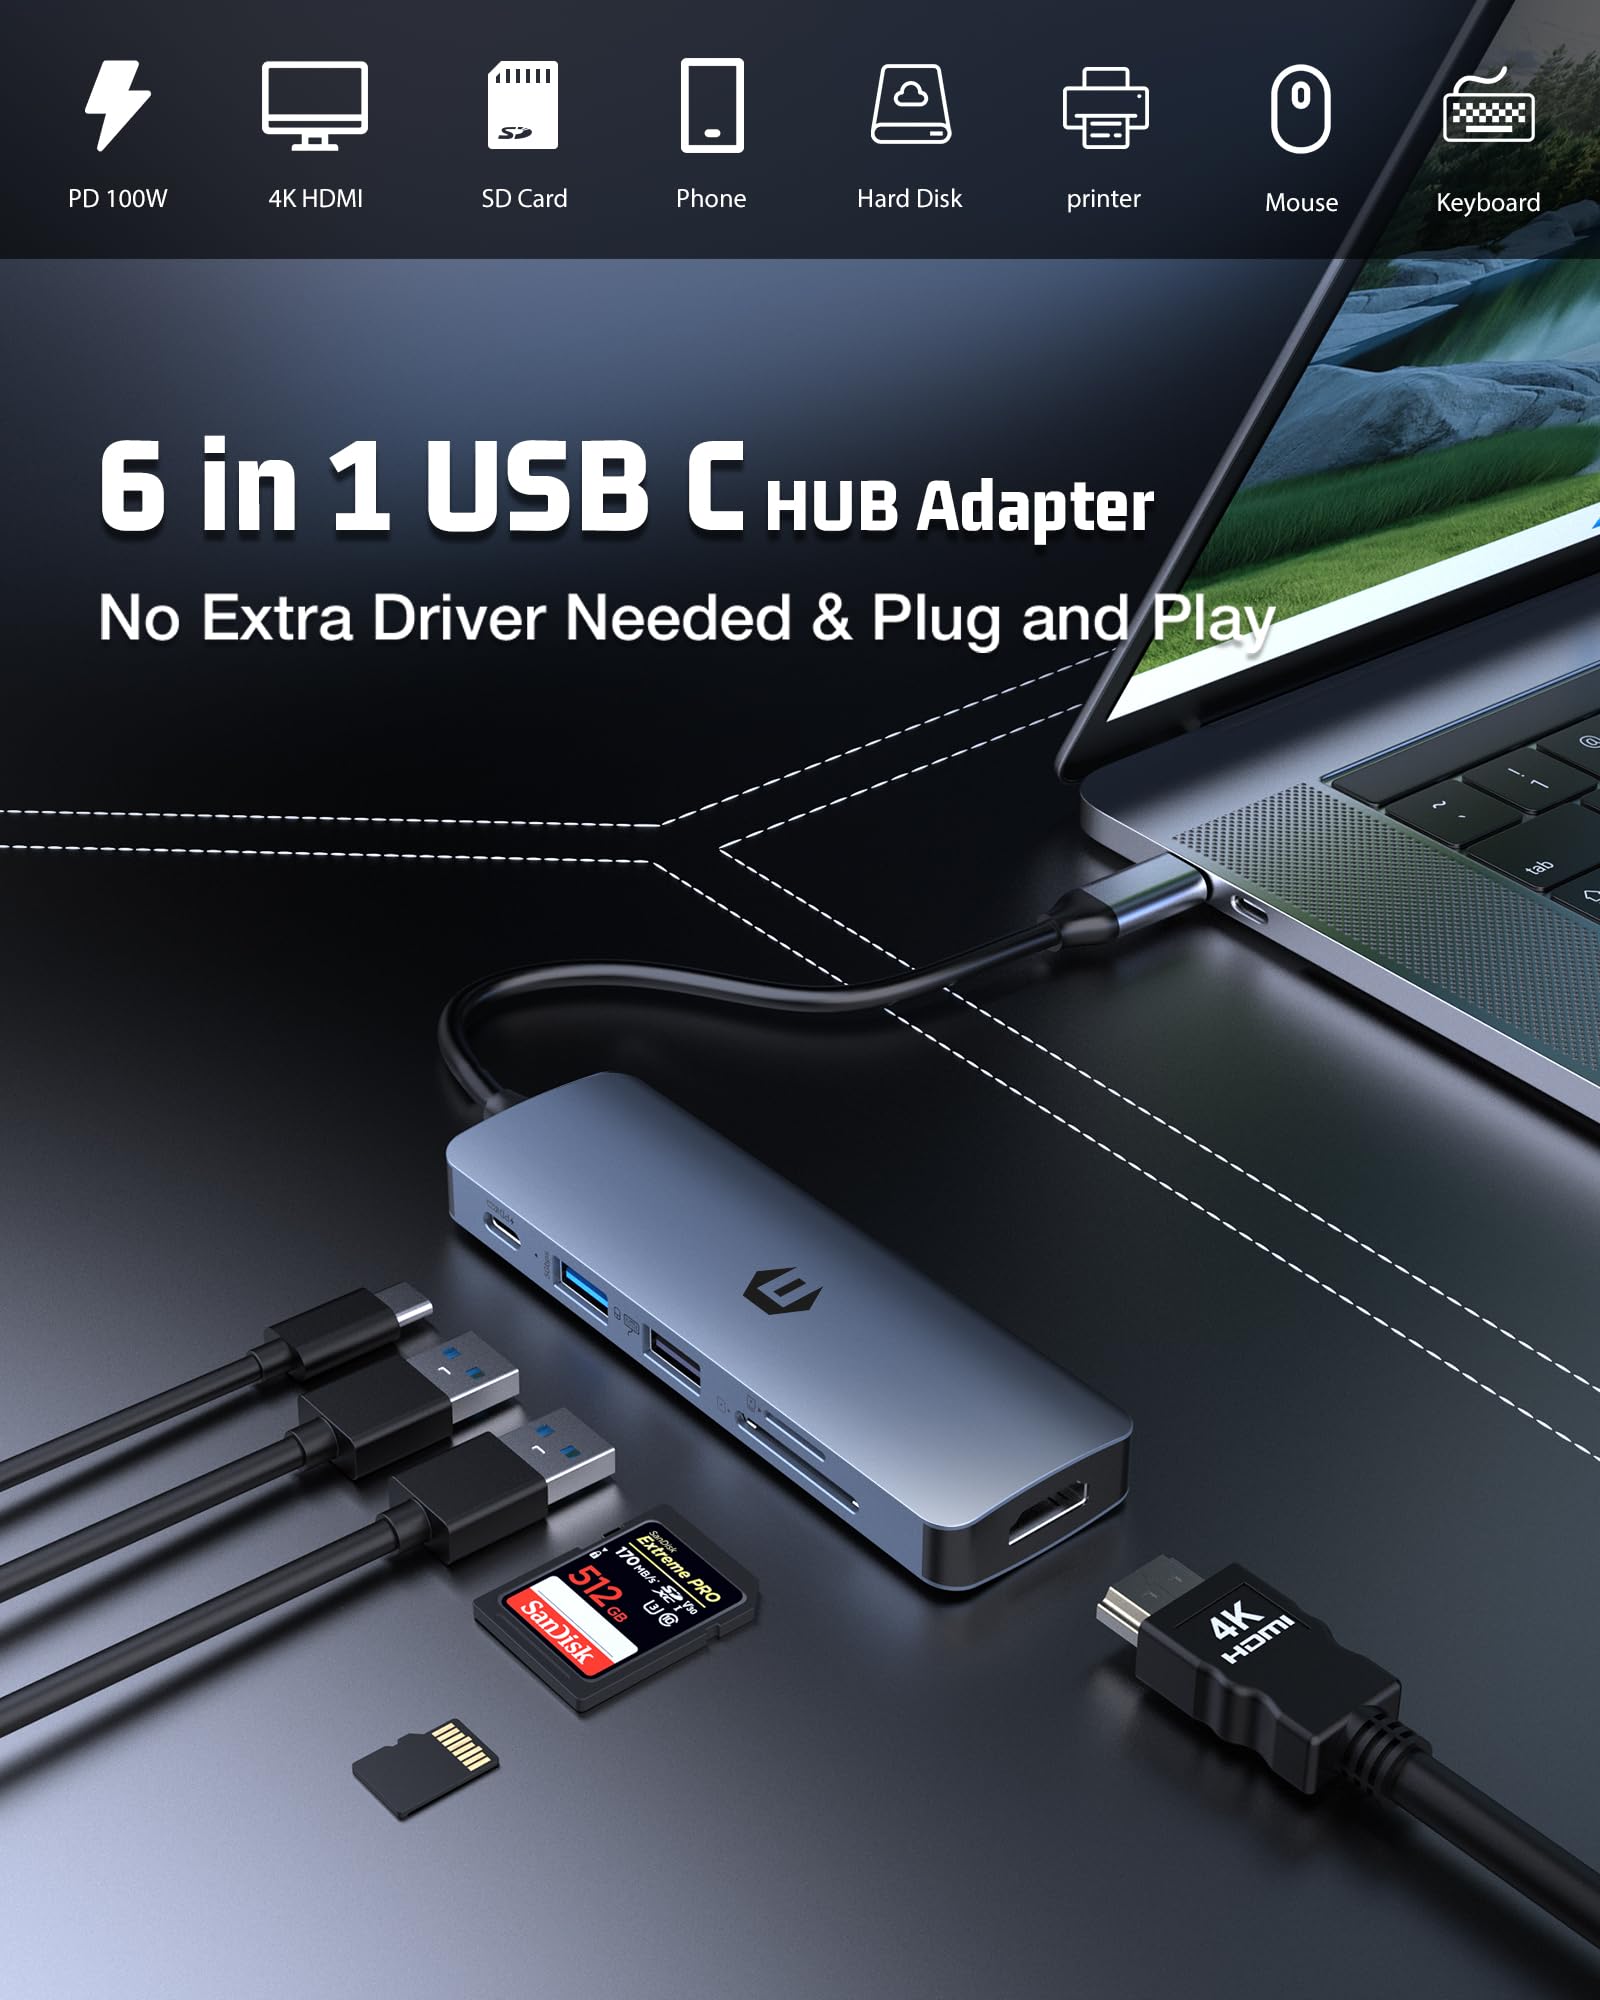 oditton 6 in 1 USB C Hub for Mac Pro/Air, iPad Pro, iMac and Beyond, Includes 4K HDMI, 100W PD, USB Ports and Card Reader